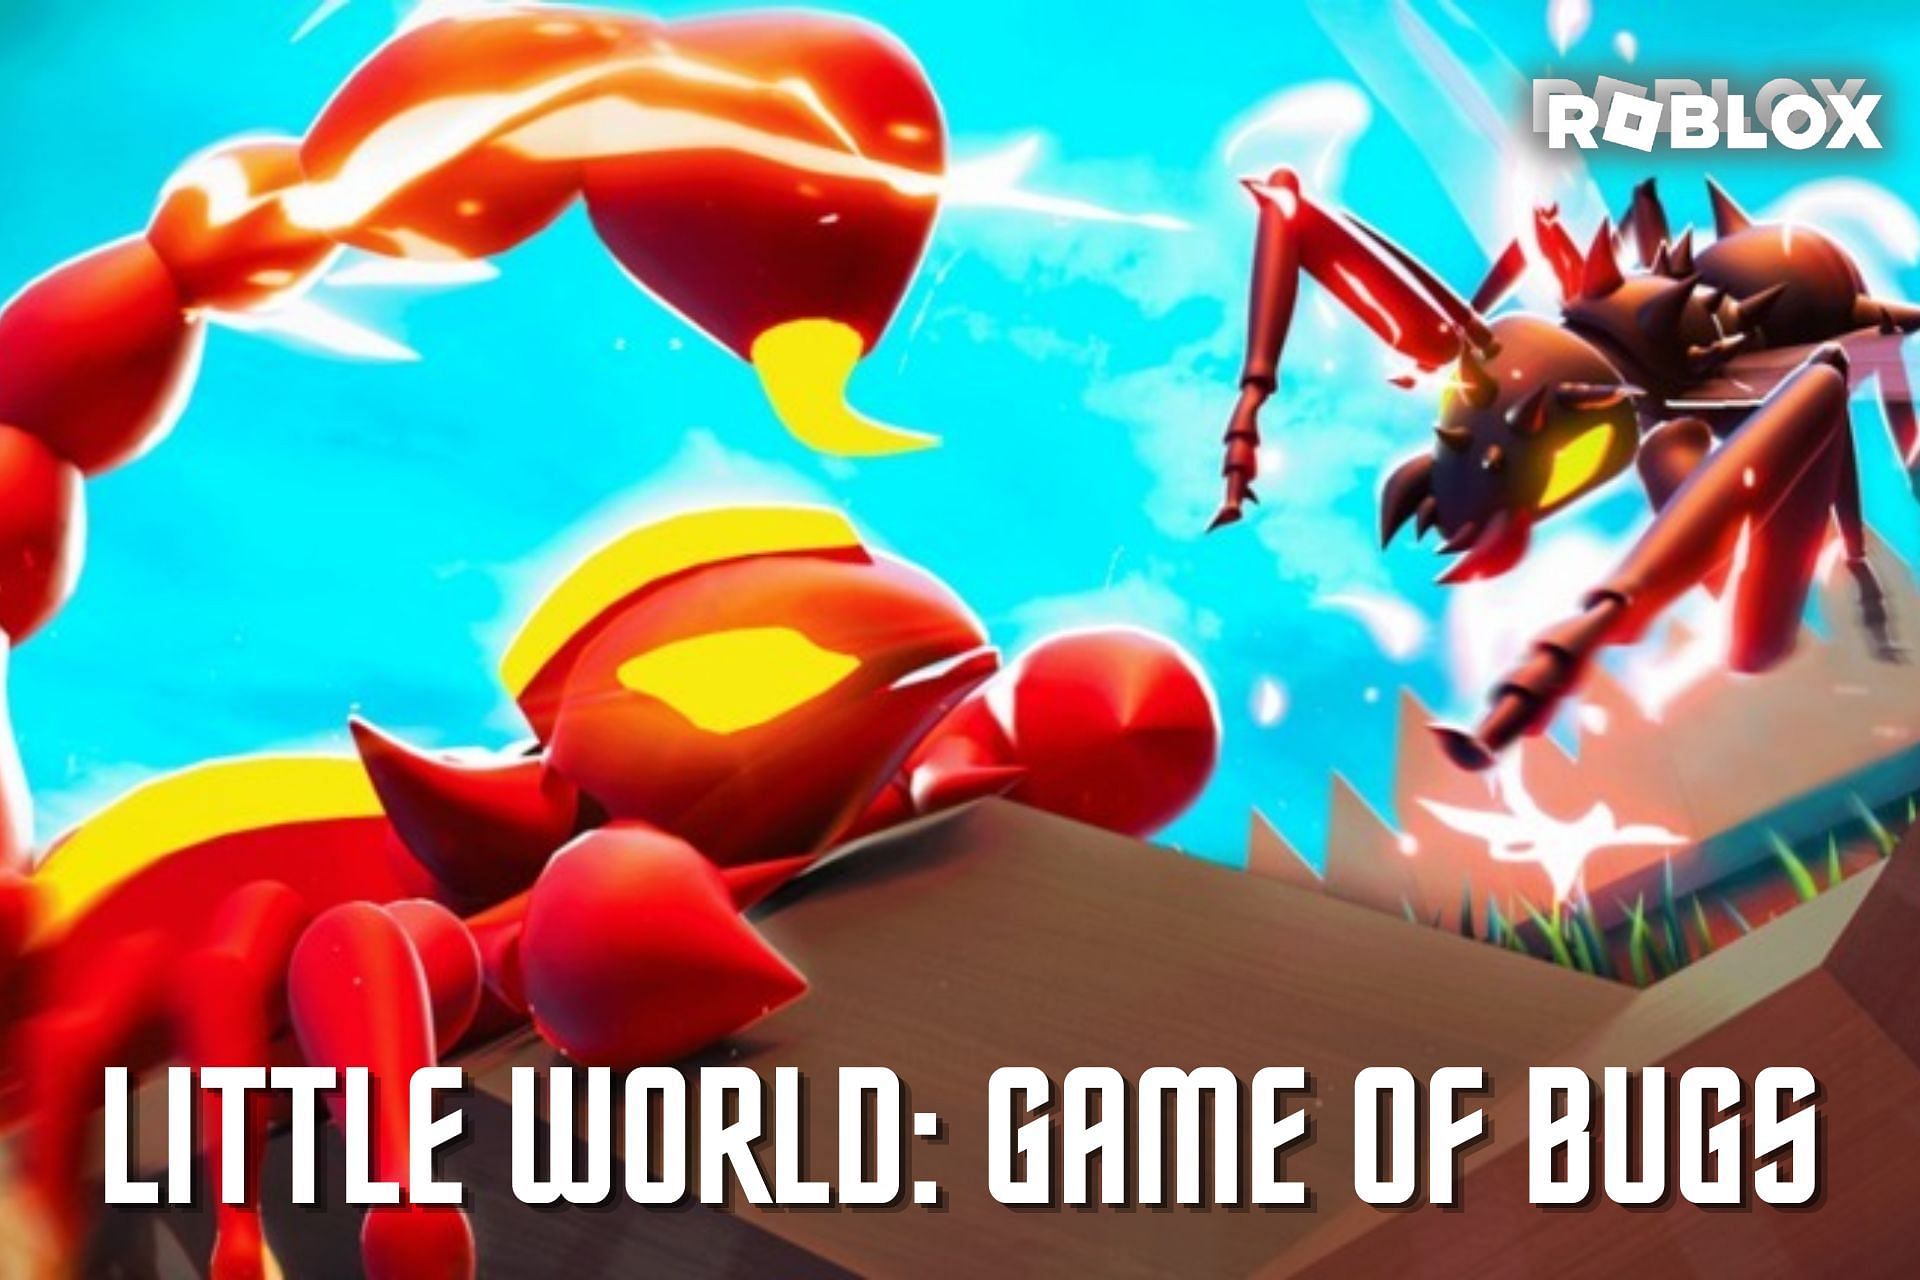 Roblox Little World: Game of bugs.